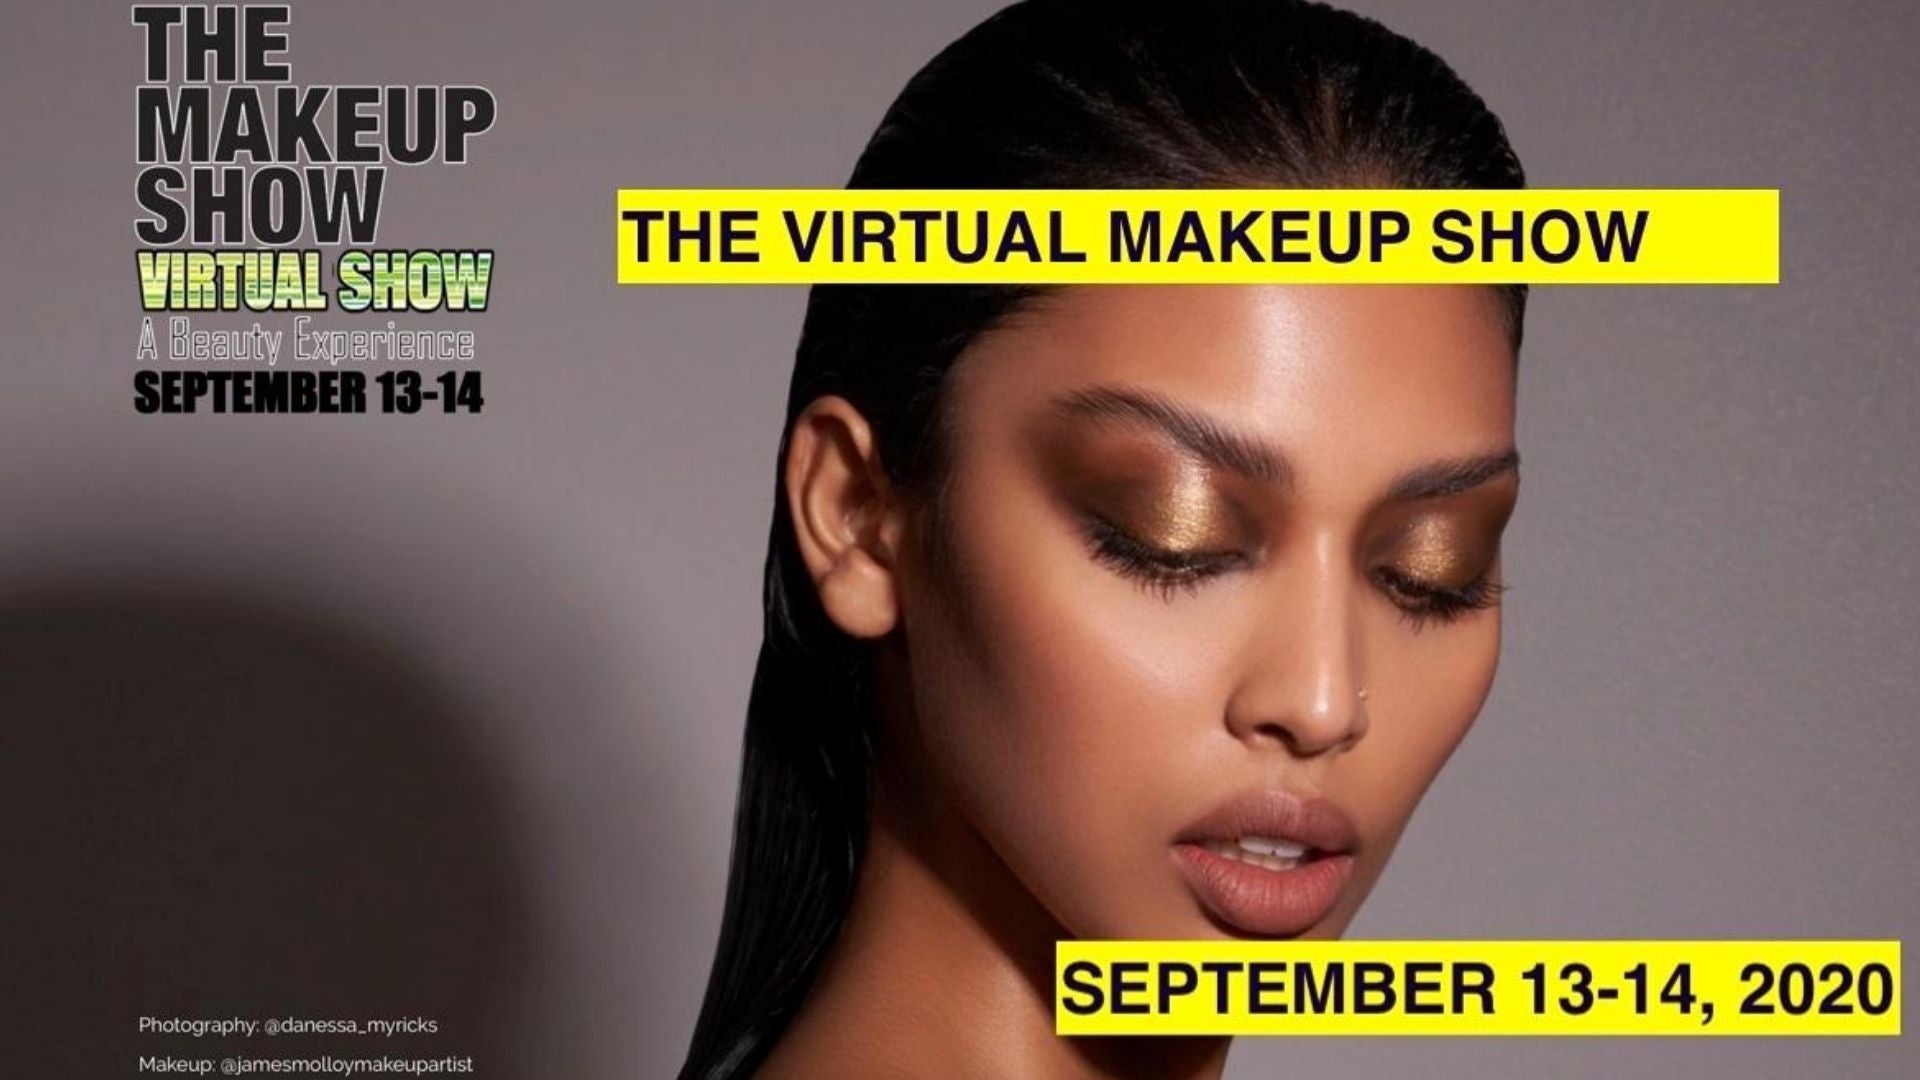 reviews, makeup, ingredients, photos, trends, 2020, 2021, the makeup show, virtual makeup show, september 2020, seminars, educational sessions, early access, tickets on sale now